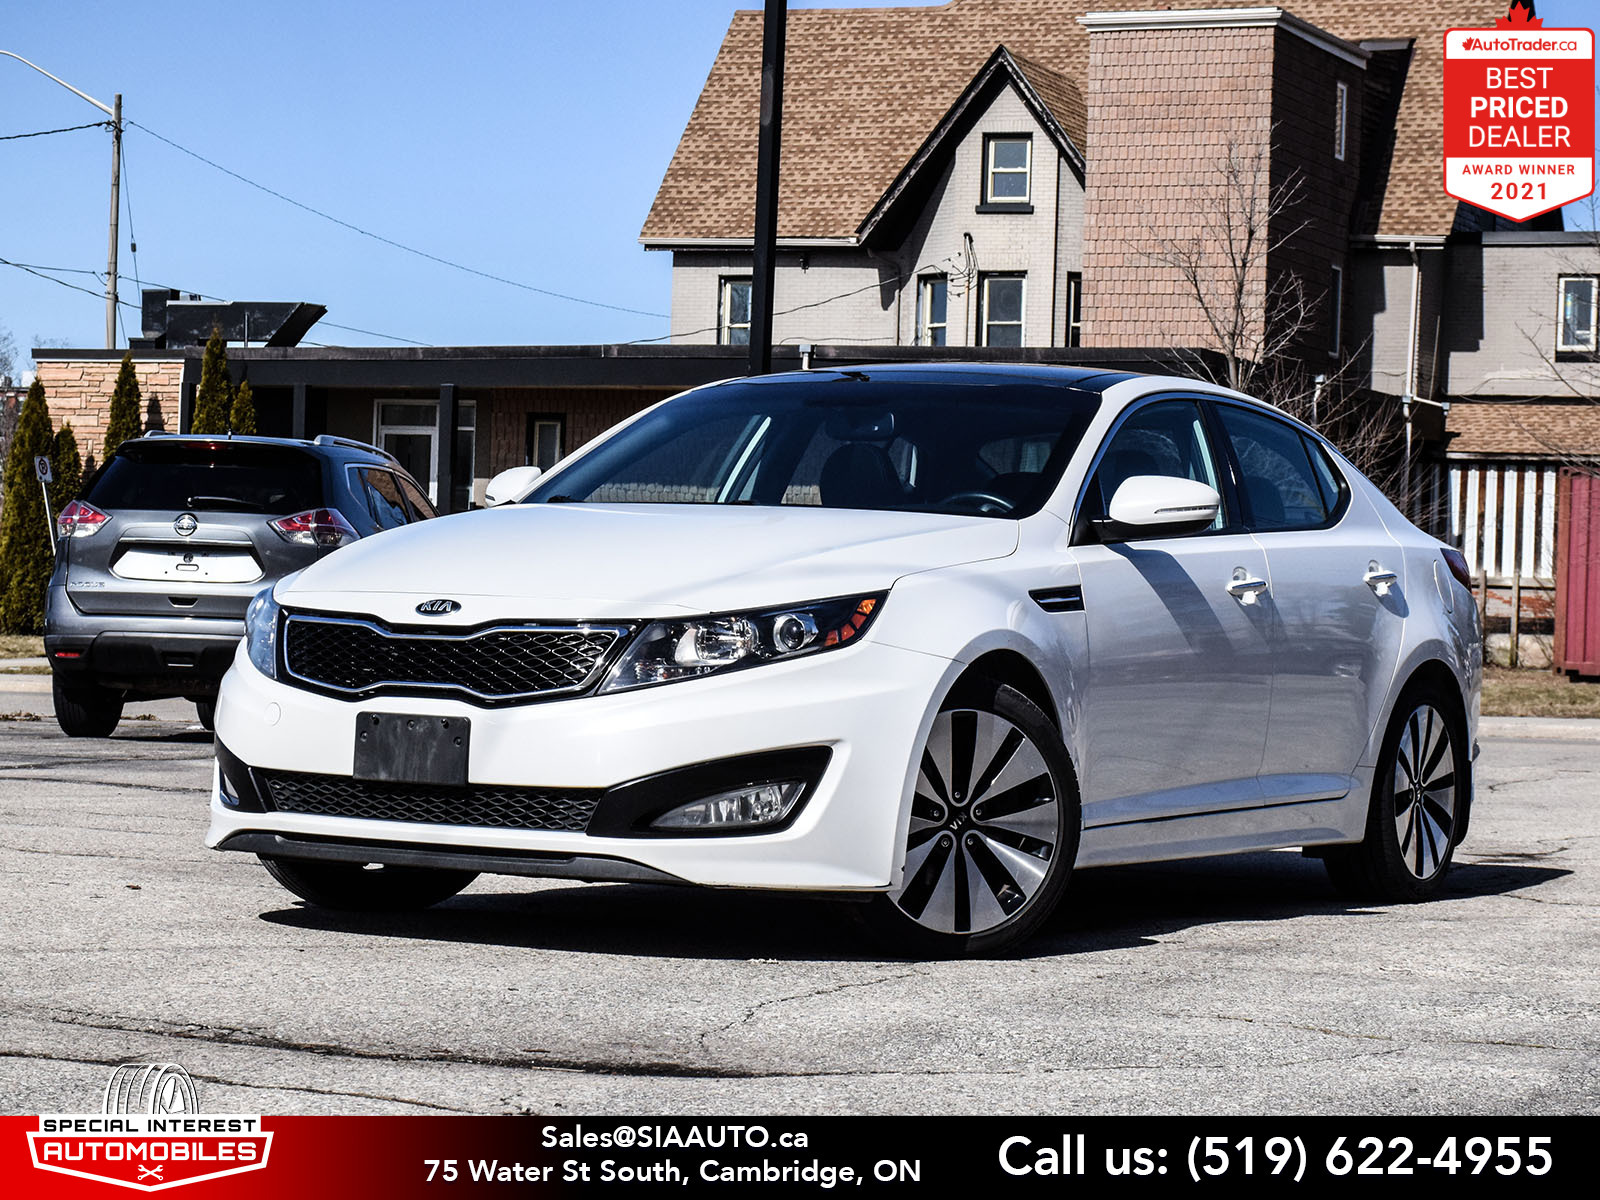 2013 Kia Optima SX * Accident Free * One Owner * Certified